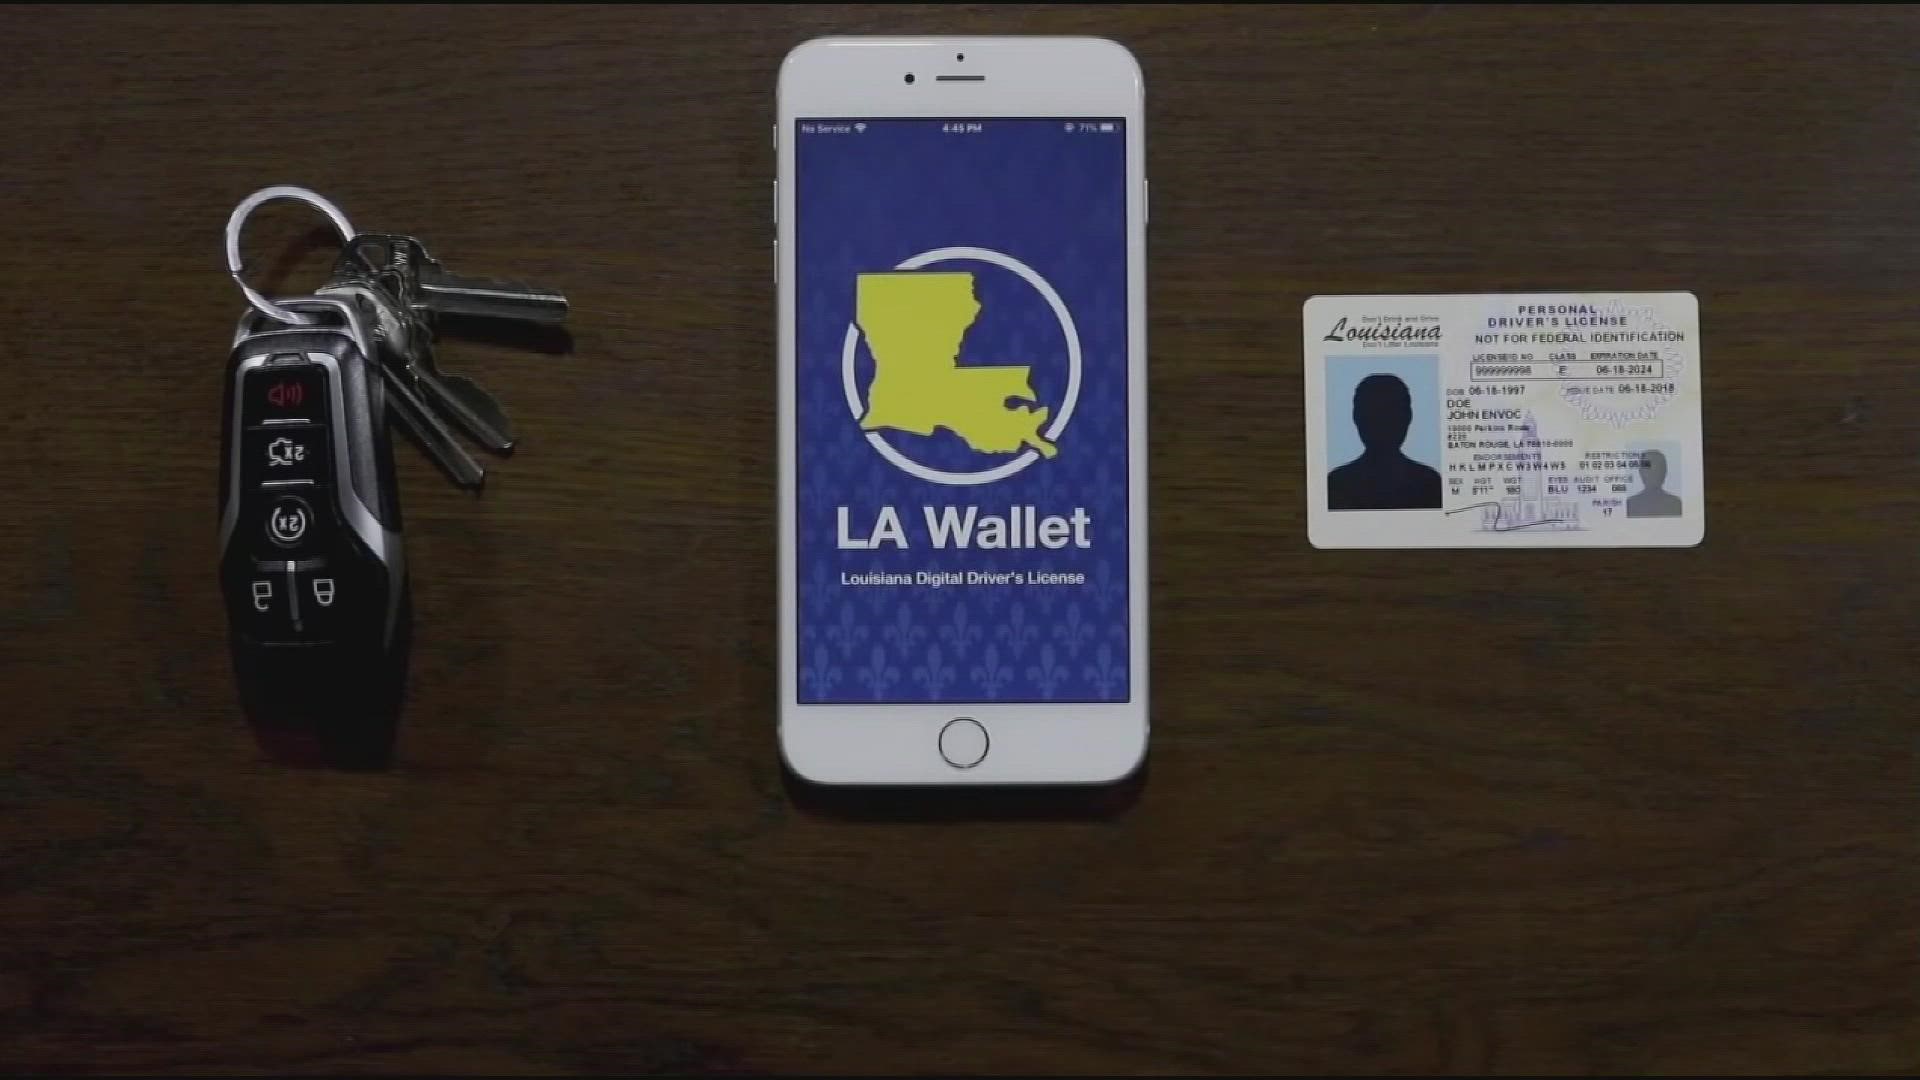 The LA Wallet app is free to download